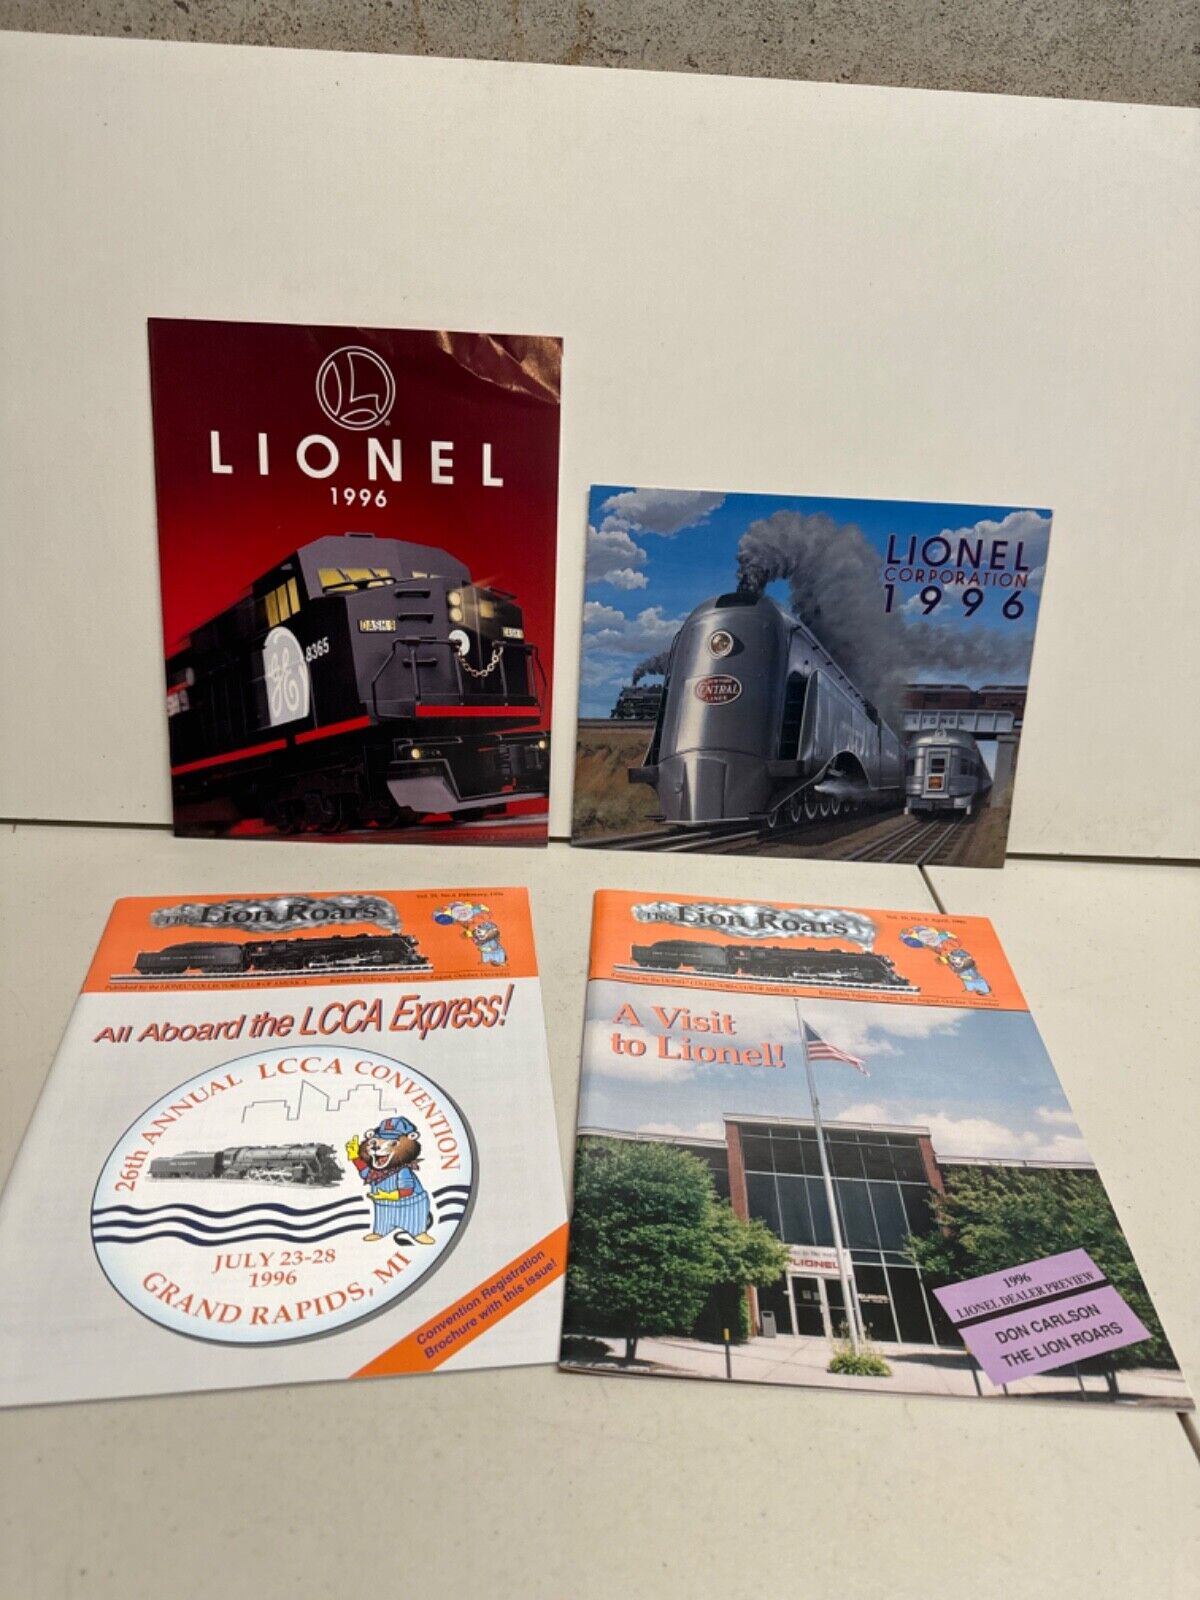 1996 Lional Catalogs and The Lion Roars Newsletter Febraury and April